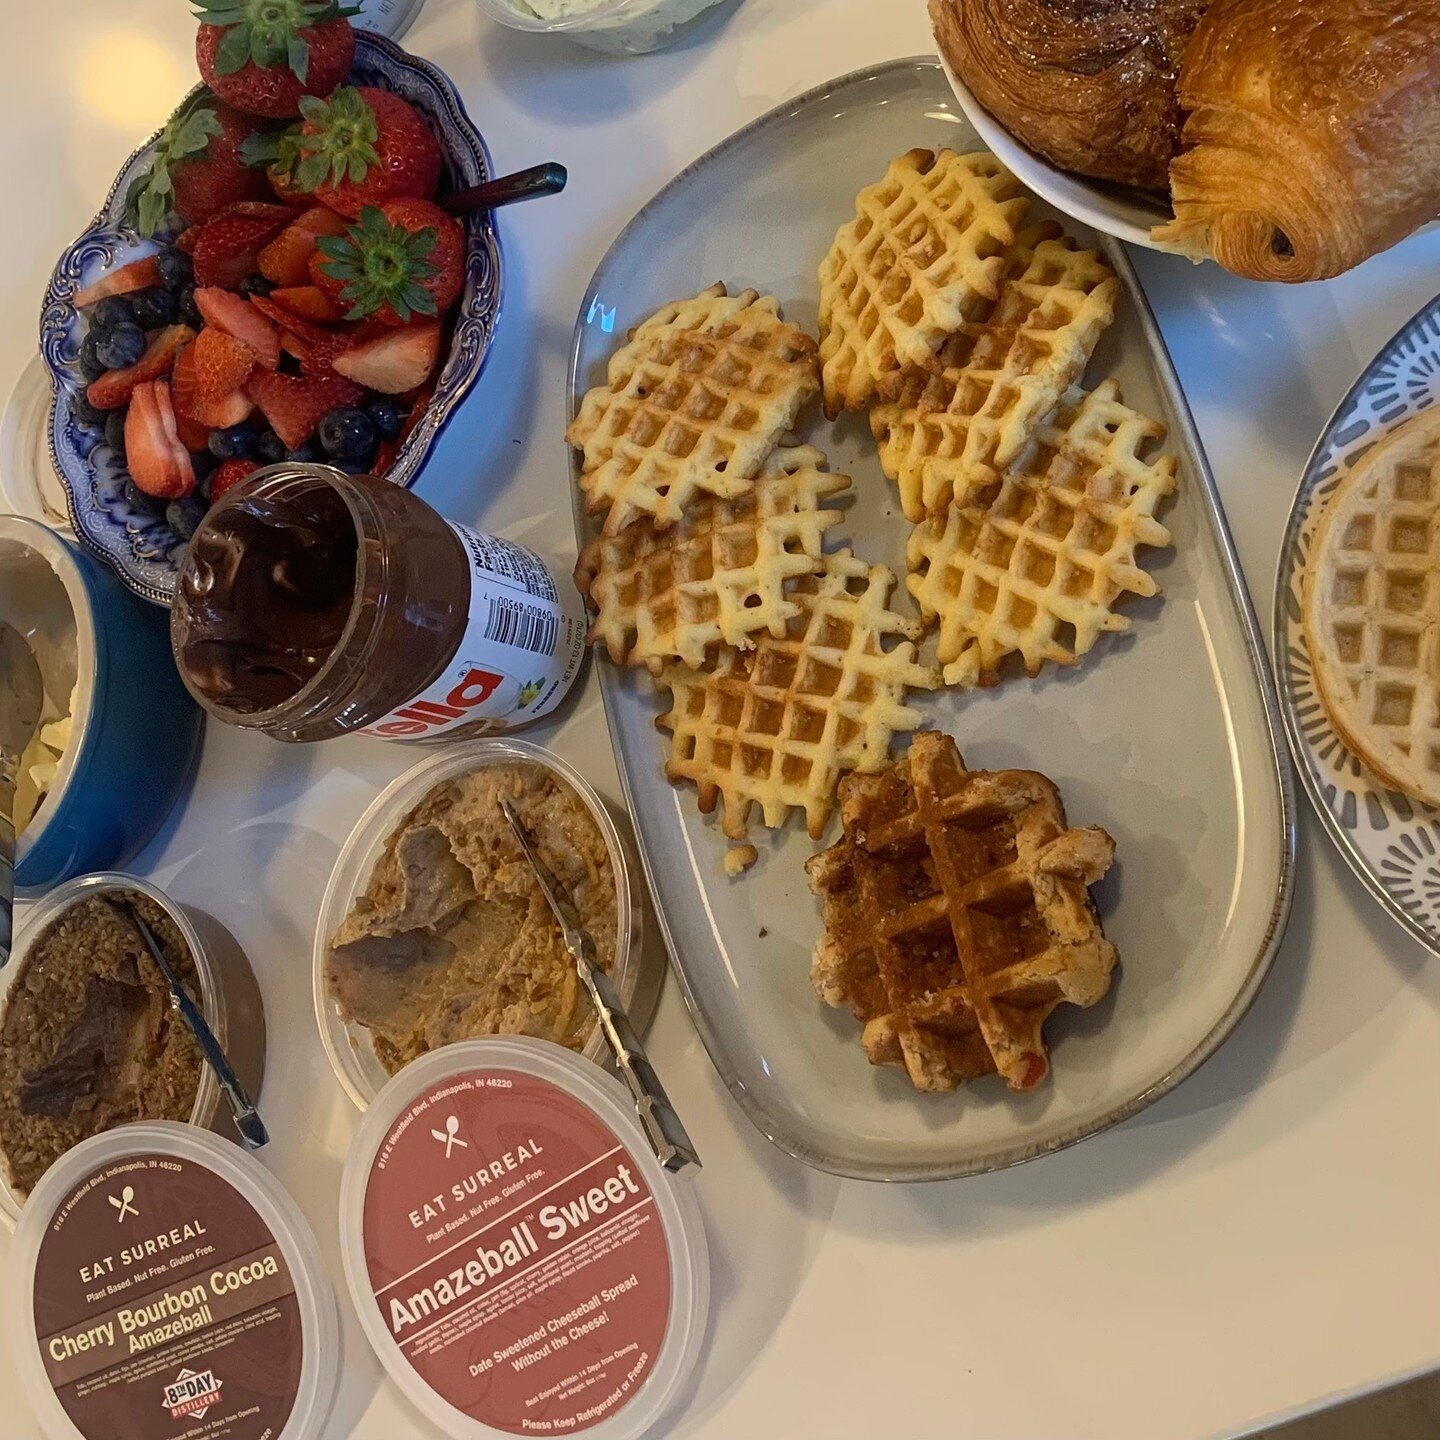 Take your brunch to the next level with Amazeball waffles topped with our Sweet or @8thdaydistillery Cherry Bourbon Cocoa spreads!